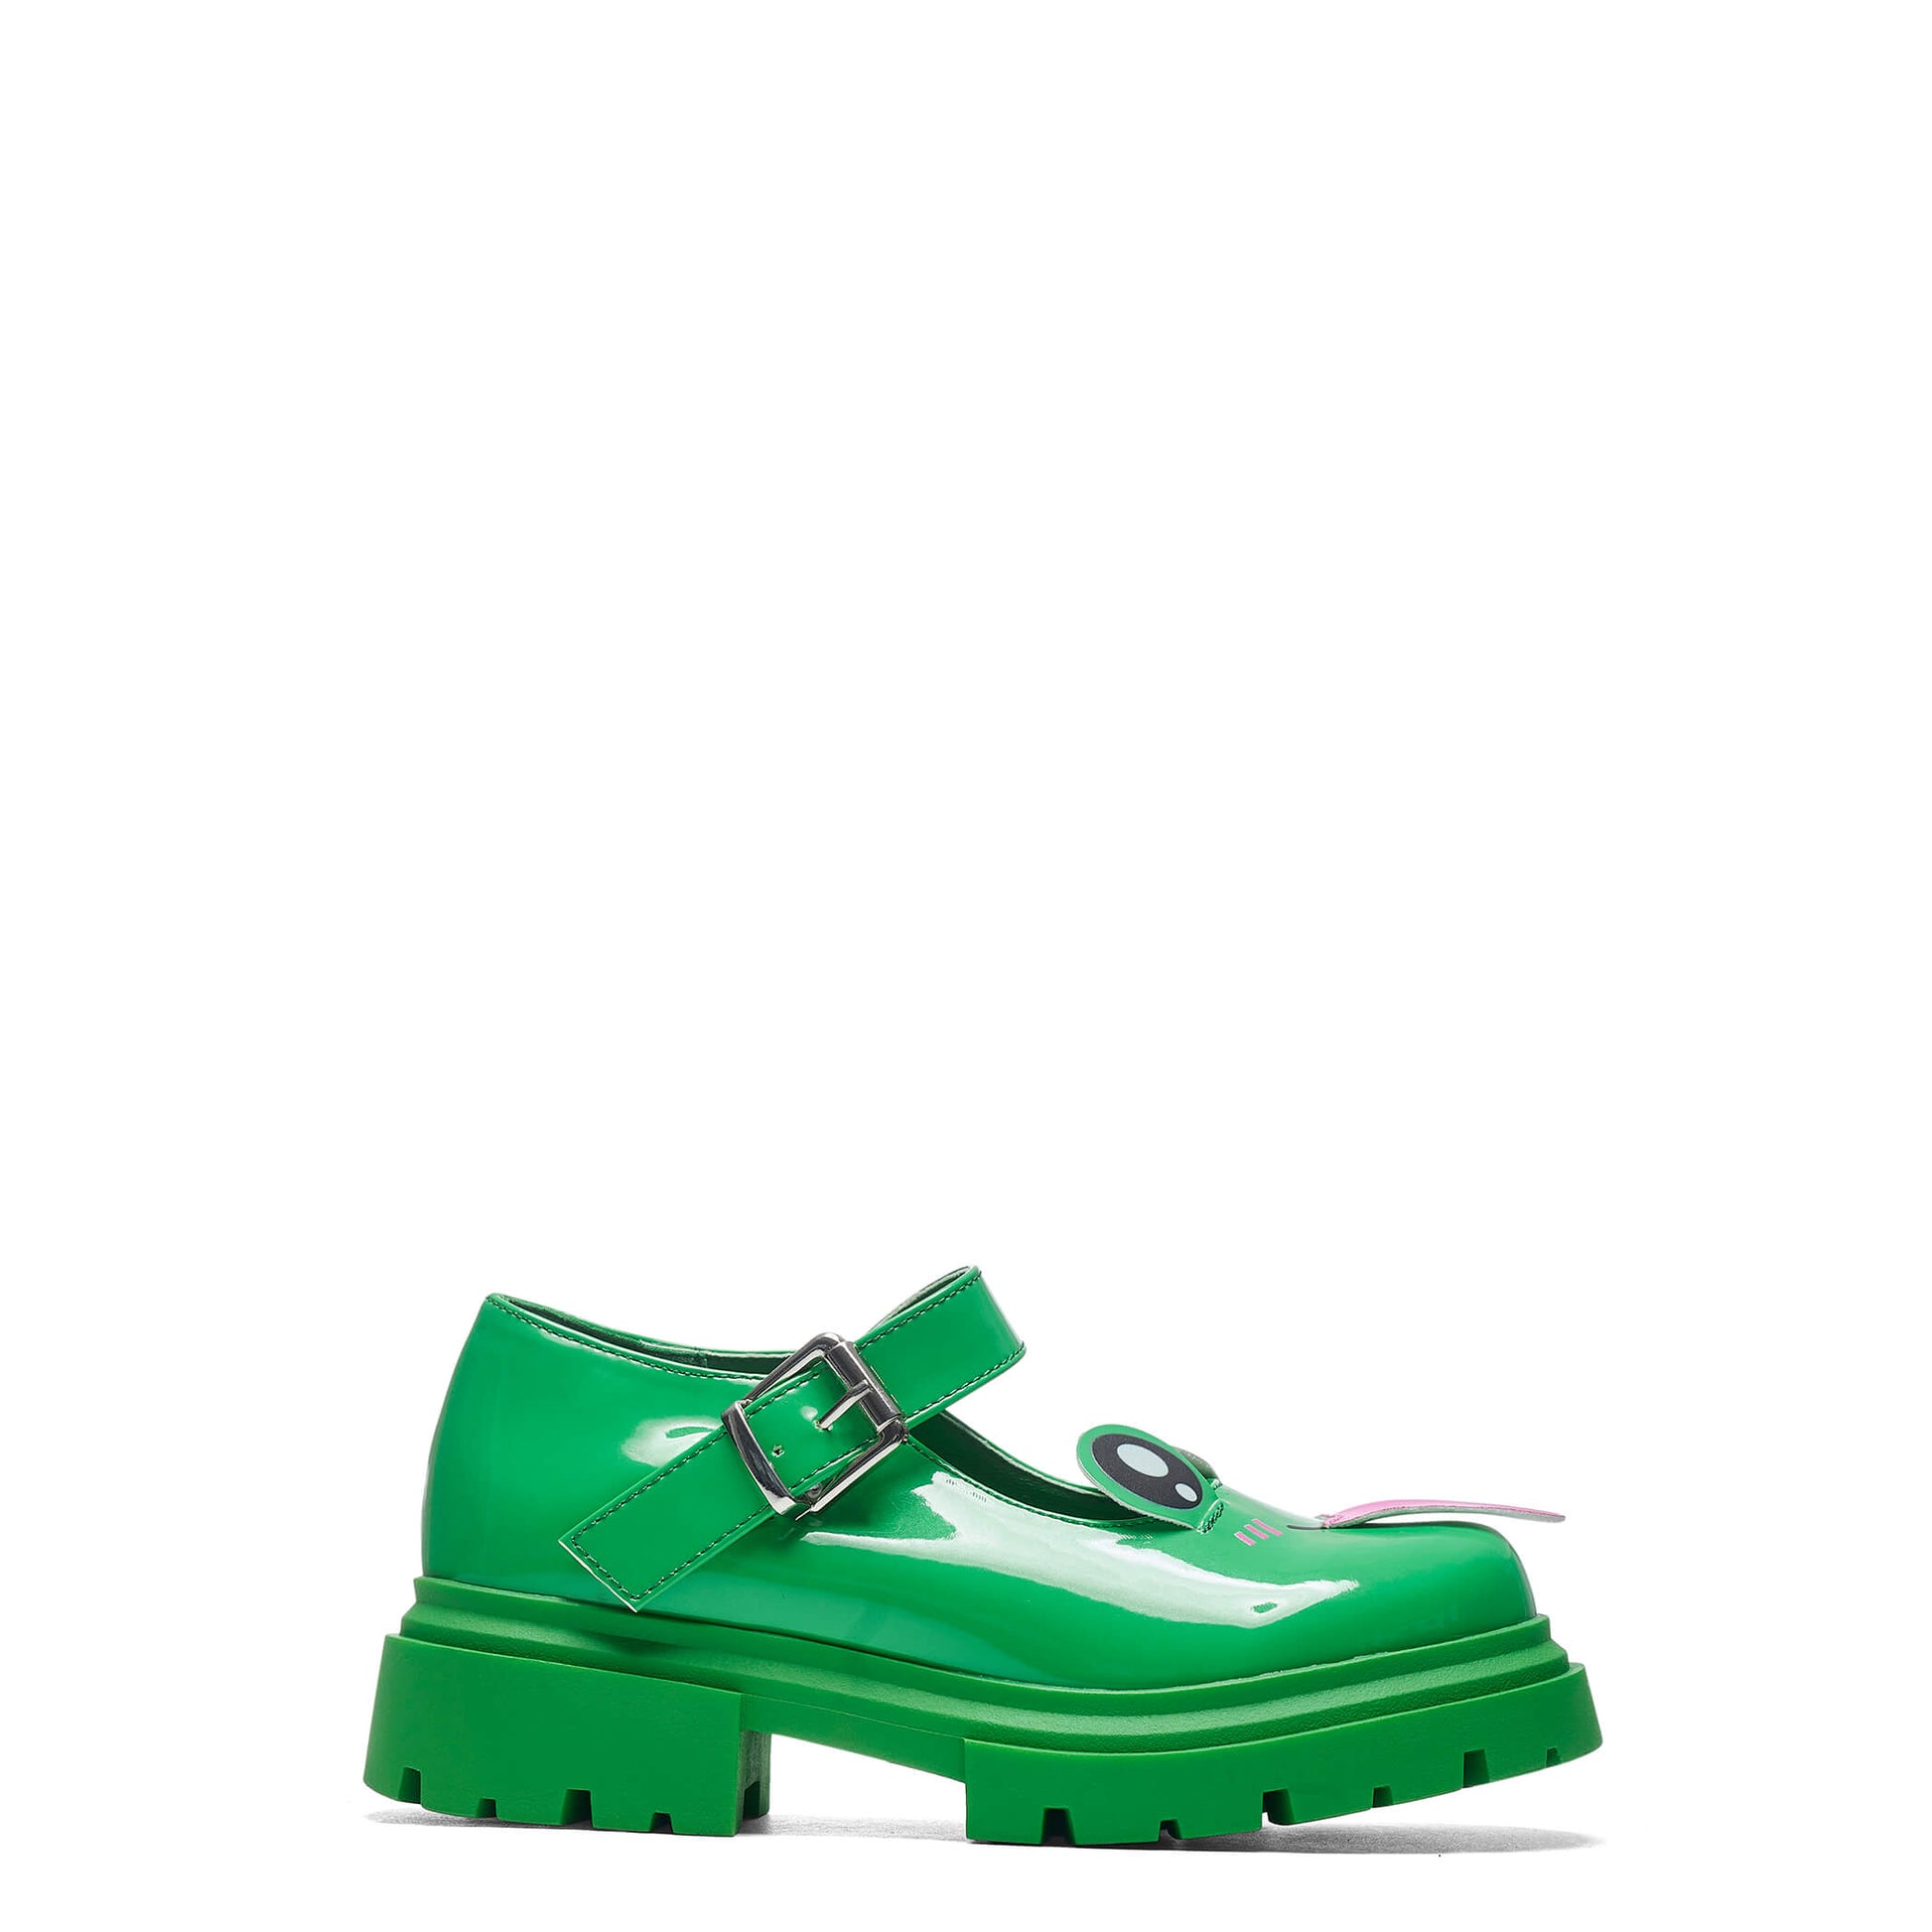 Lil’ Tira Cheeky Frog Mary Janes - Mary Janes - KOI Footwear - Green - Side View